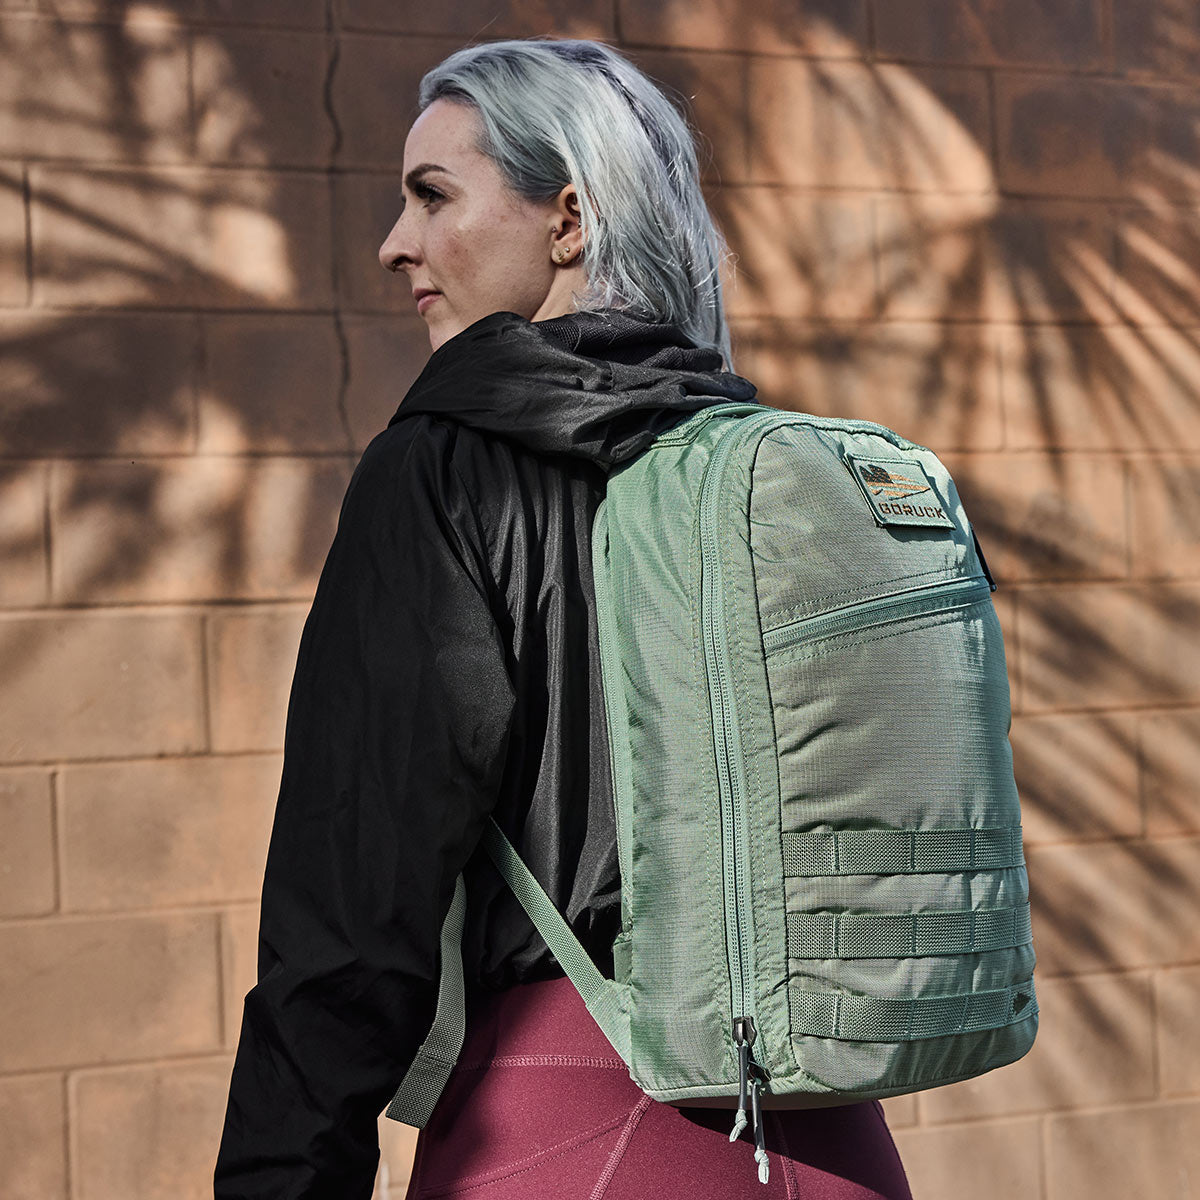 New GR1 Women's Ruck: Tough and Ready to Travel – GORUCK Blog Archive